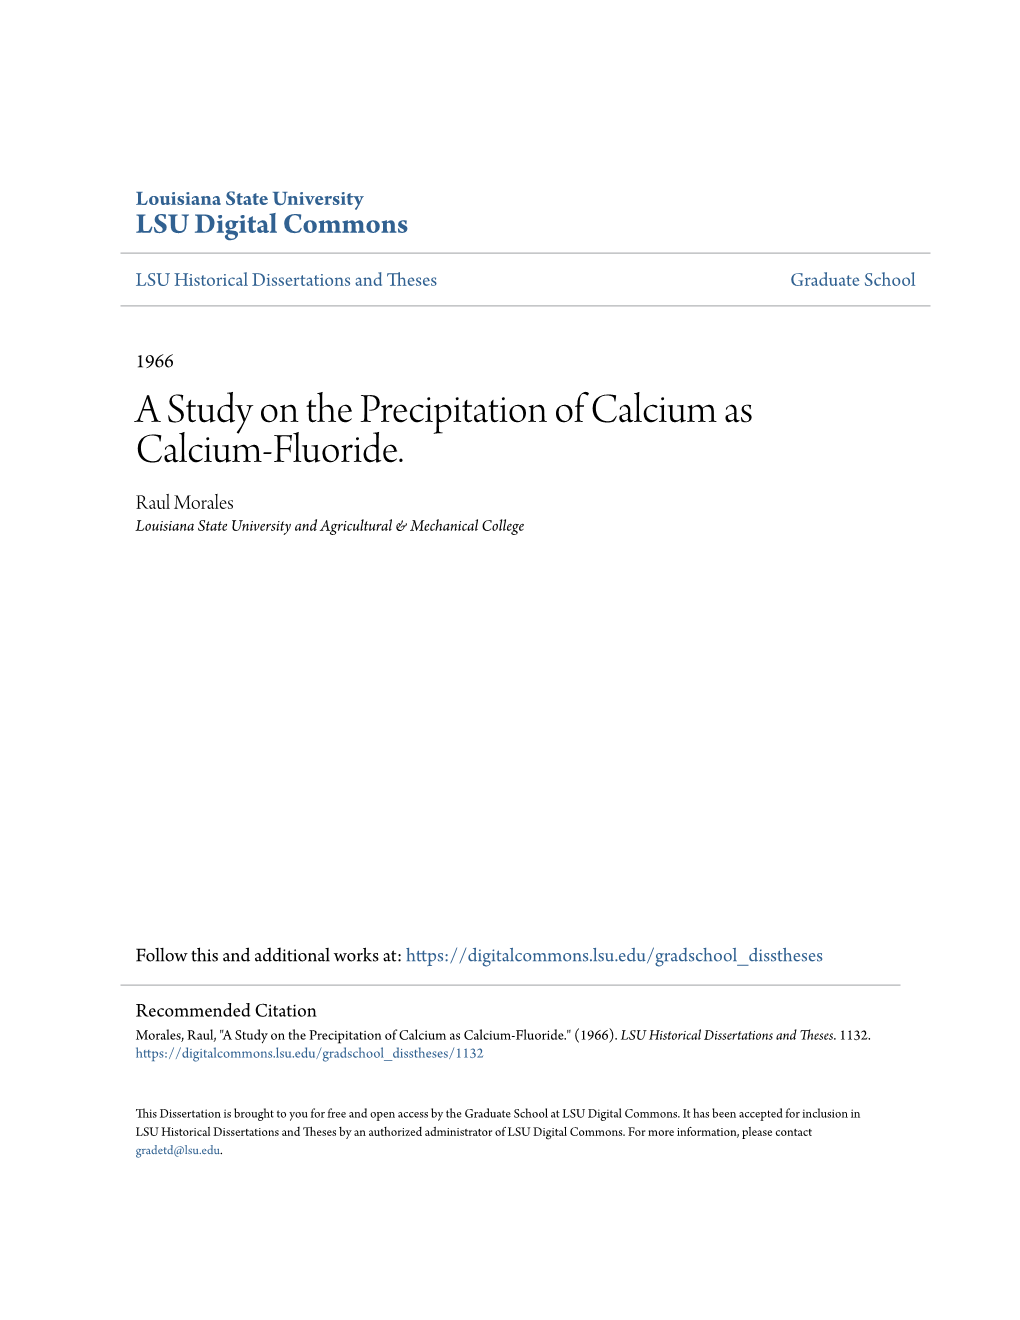 A Study on the Precipitation of Calcium As Calcium-Fluoride. Raul Morales Louisiana State University and Agricultural & Mechanical College